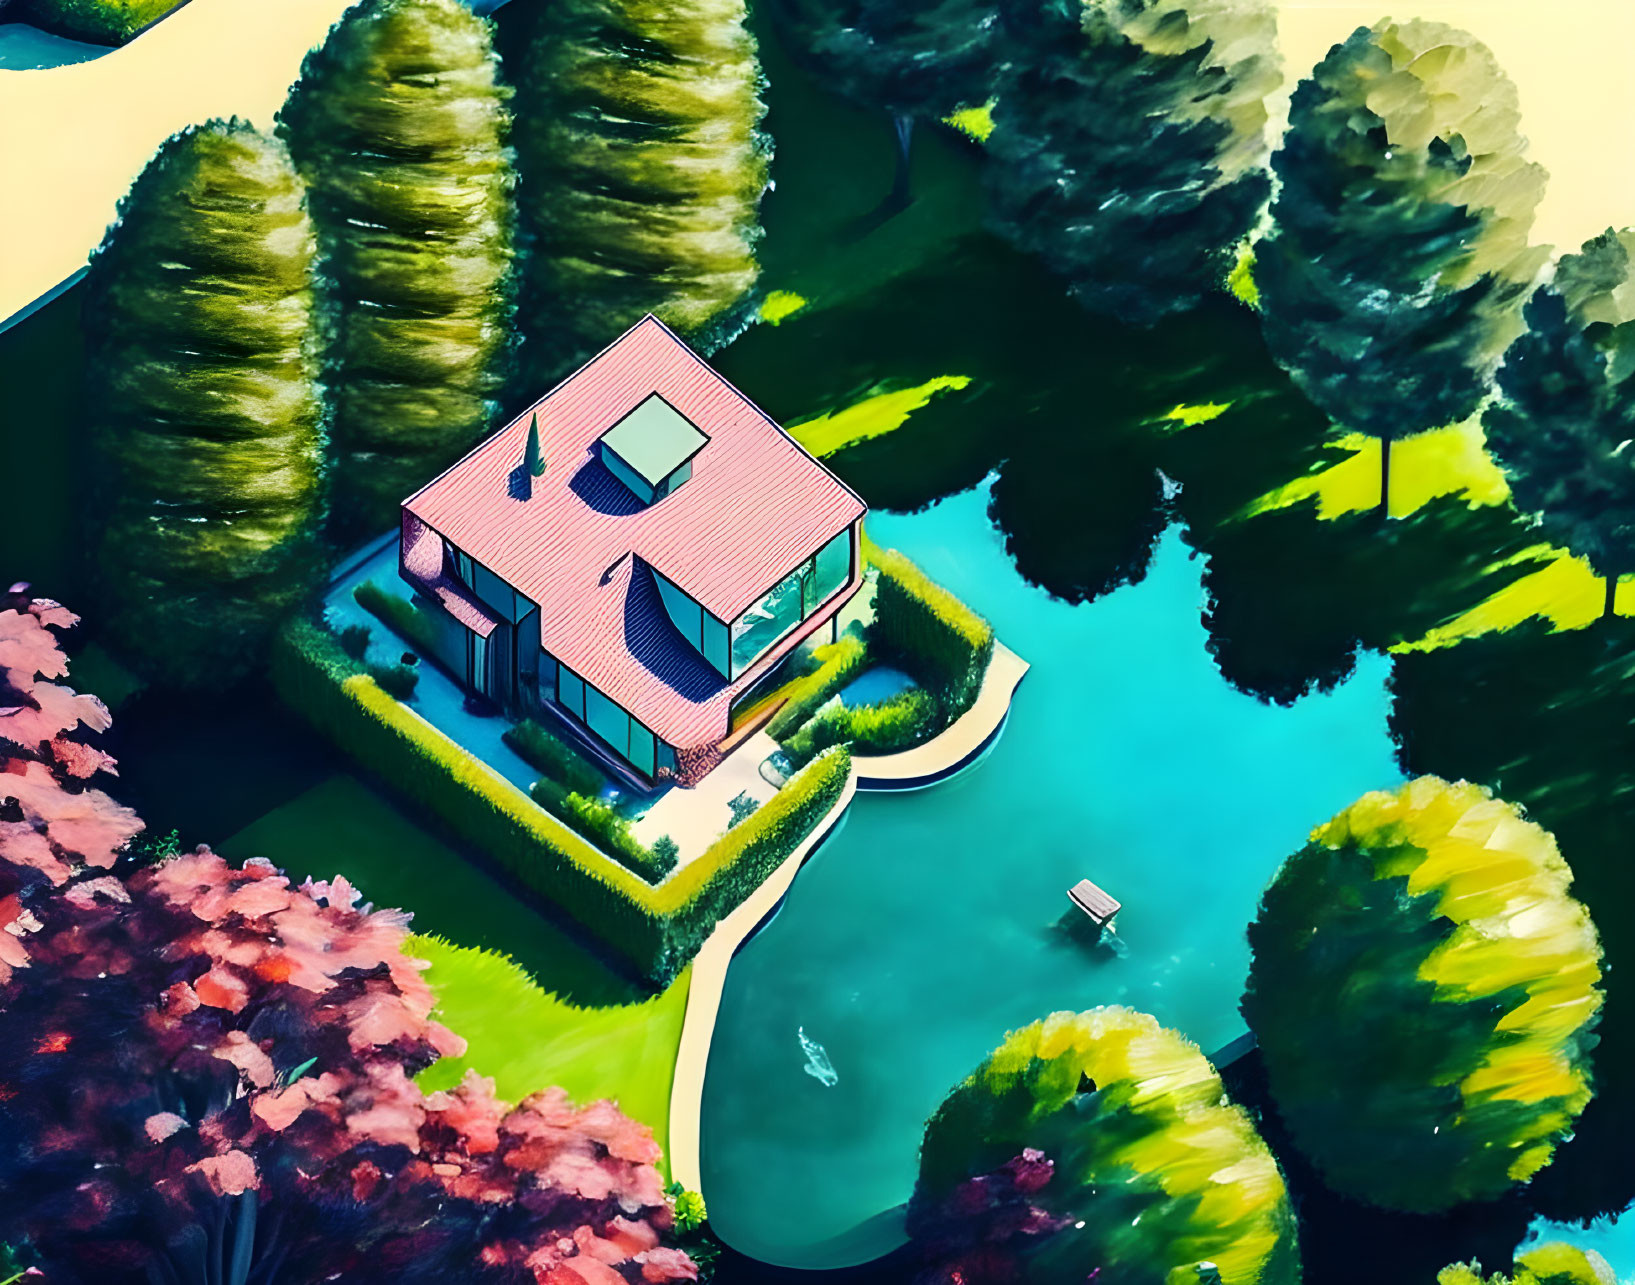 Colorful Isometric Illustration of House by Water with Trees and Boat